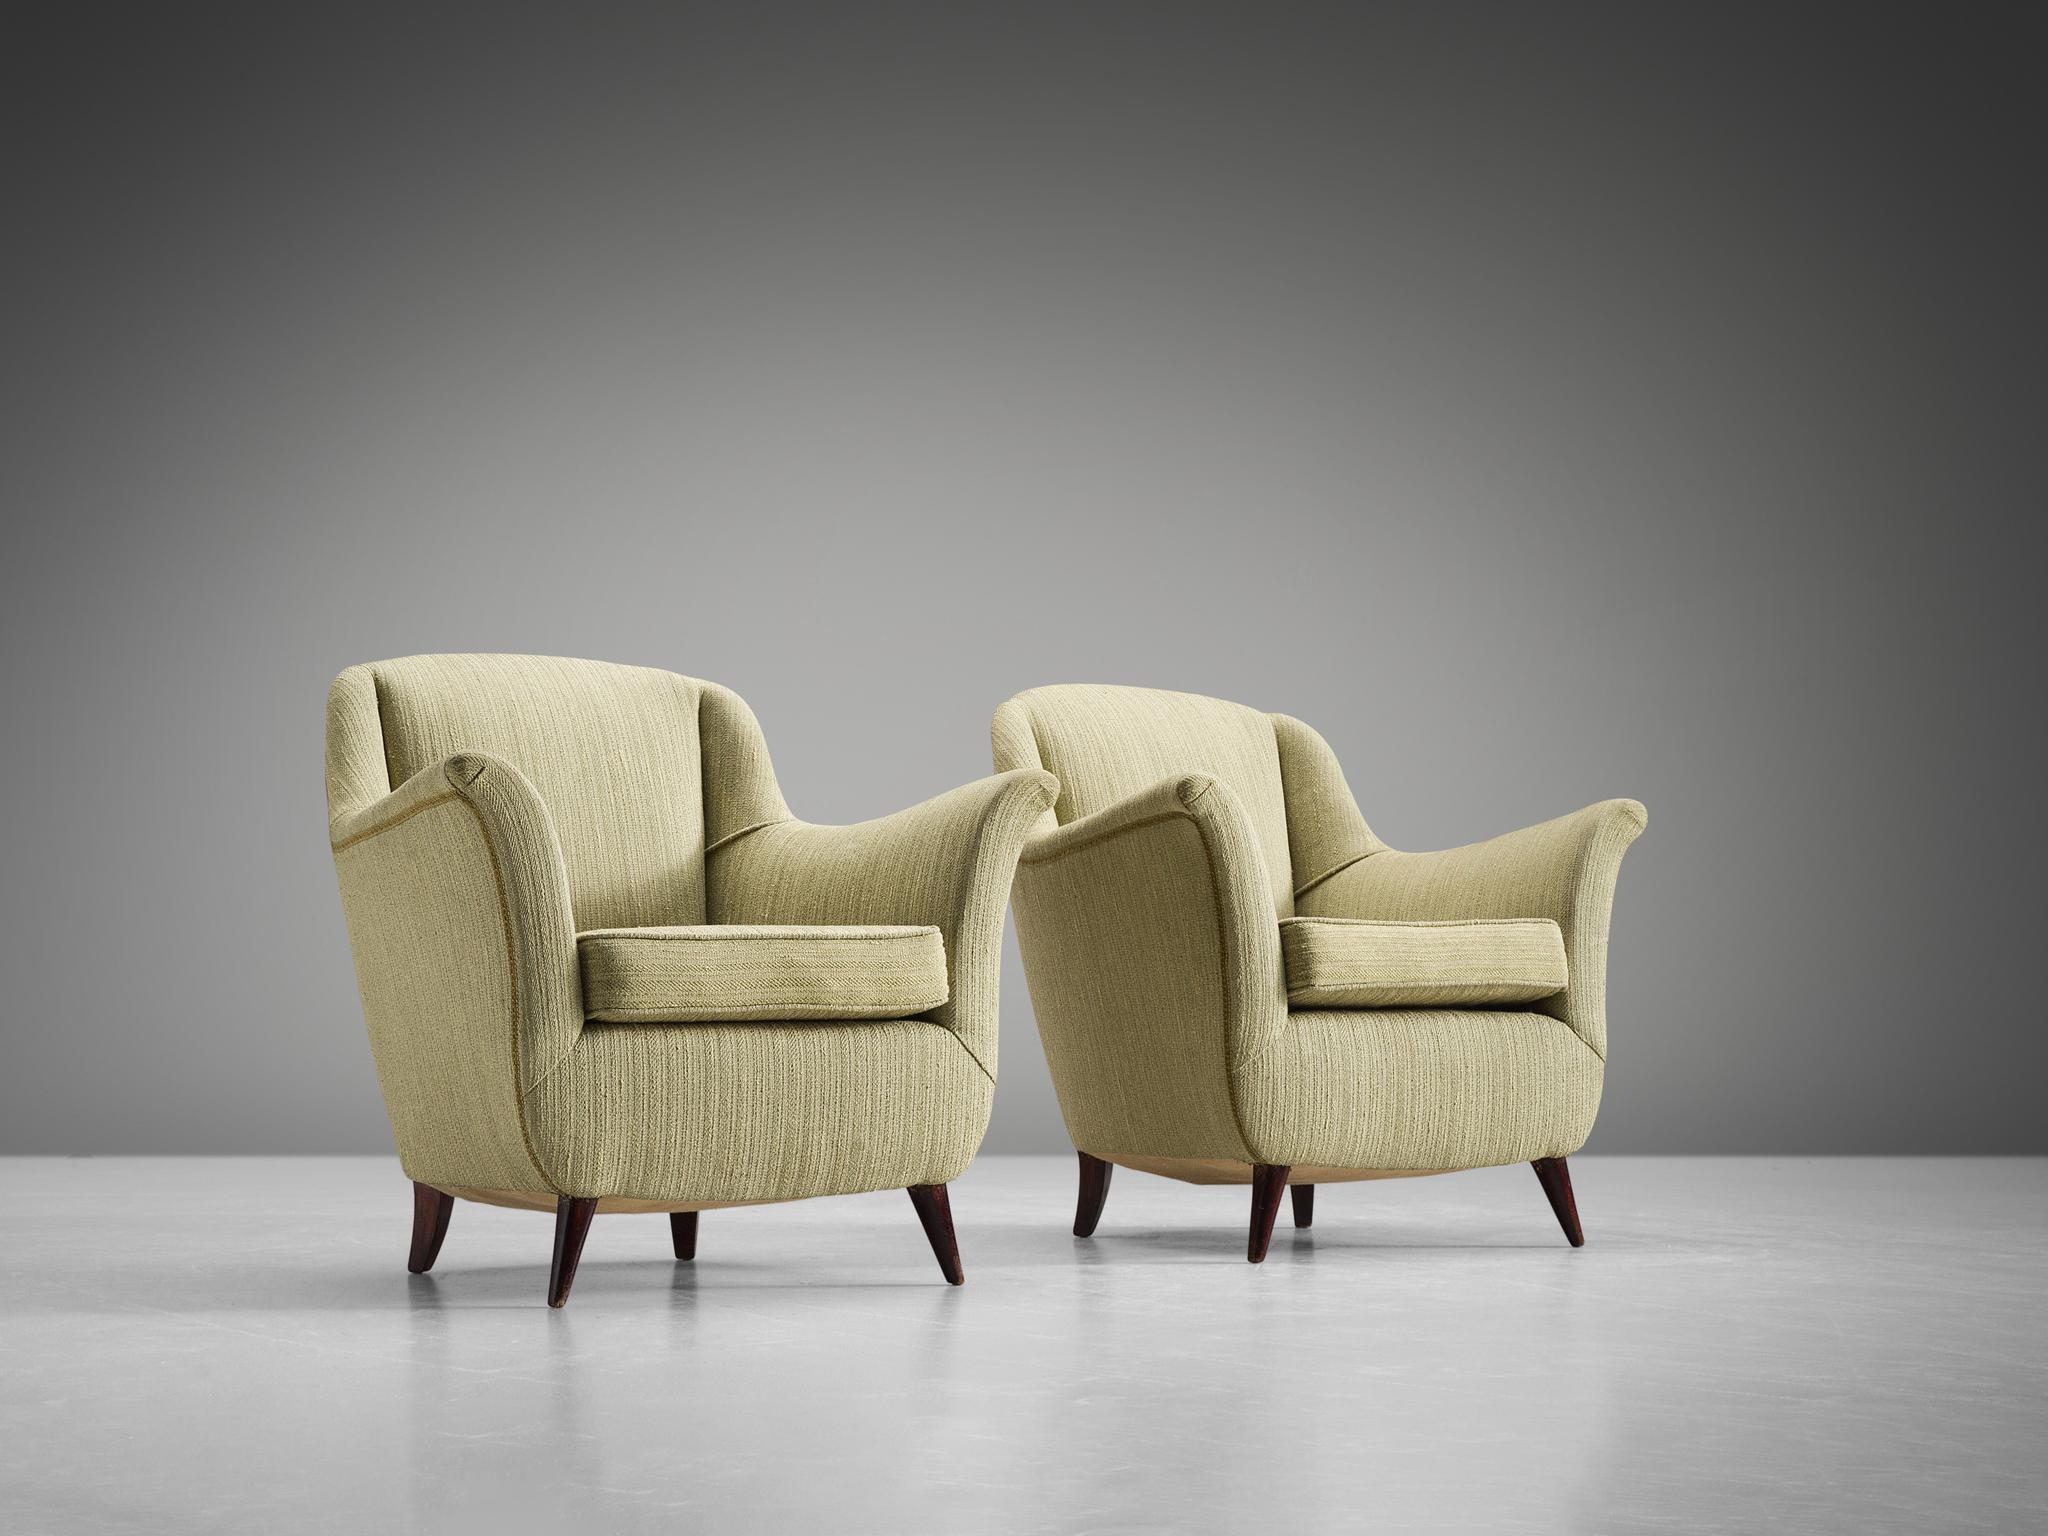 Pair of armchairs, green fabric, wood, Italy, 1950s.

This set of lounge chairs is both voluptuous and grand as they are comfortable. The chairs have semi high wingbacks and feature green fabric and small tapered wooden legs. Typical curvy, bold